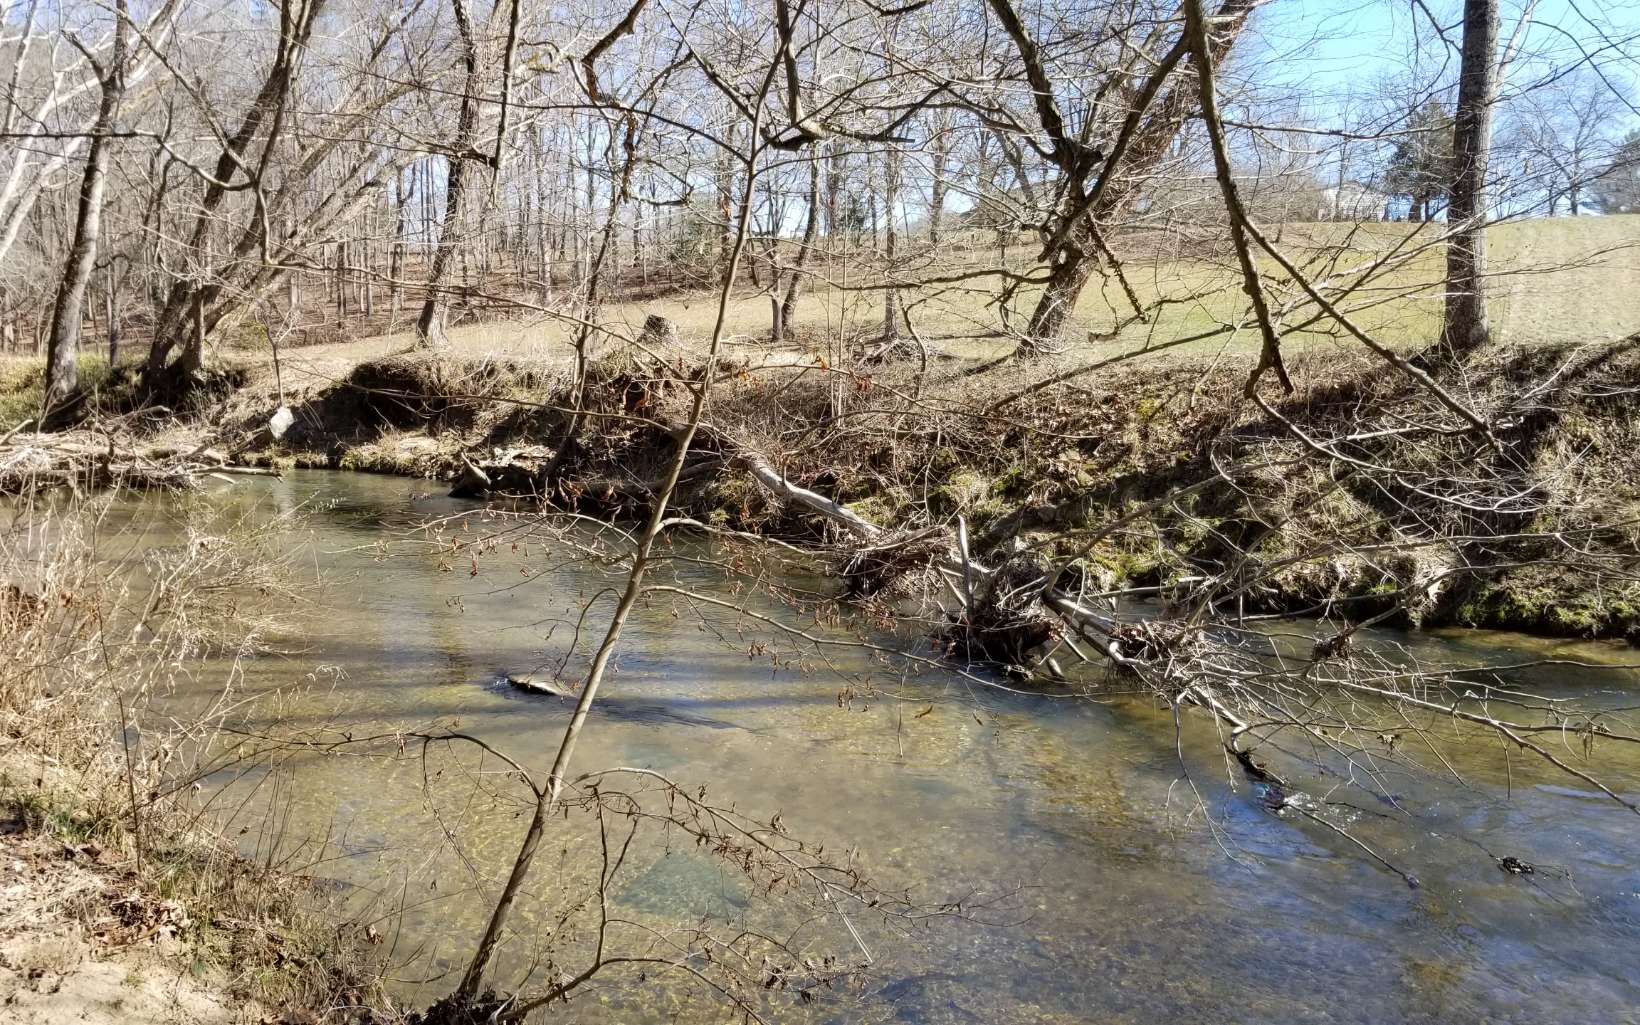 Build your escape home on Brass Town Creek. One of of the best trout streams in the area. In addition to the lovely fast flowing creek, there are excellent seasonal meadow views on the other side. Priced under assessed value. Road and building pad will need to be developed.